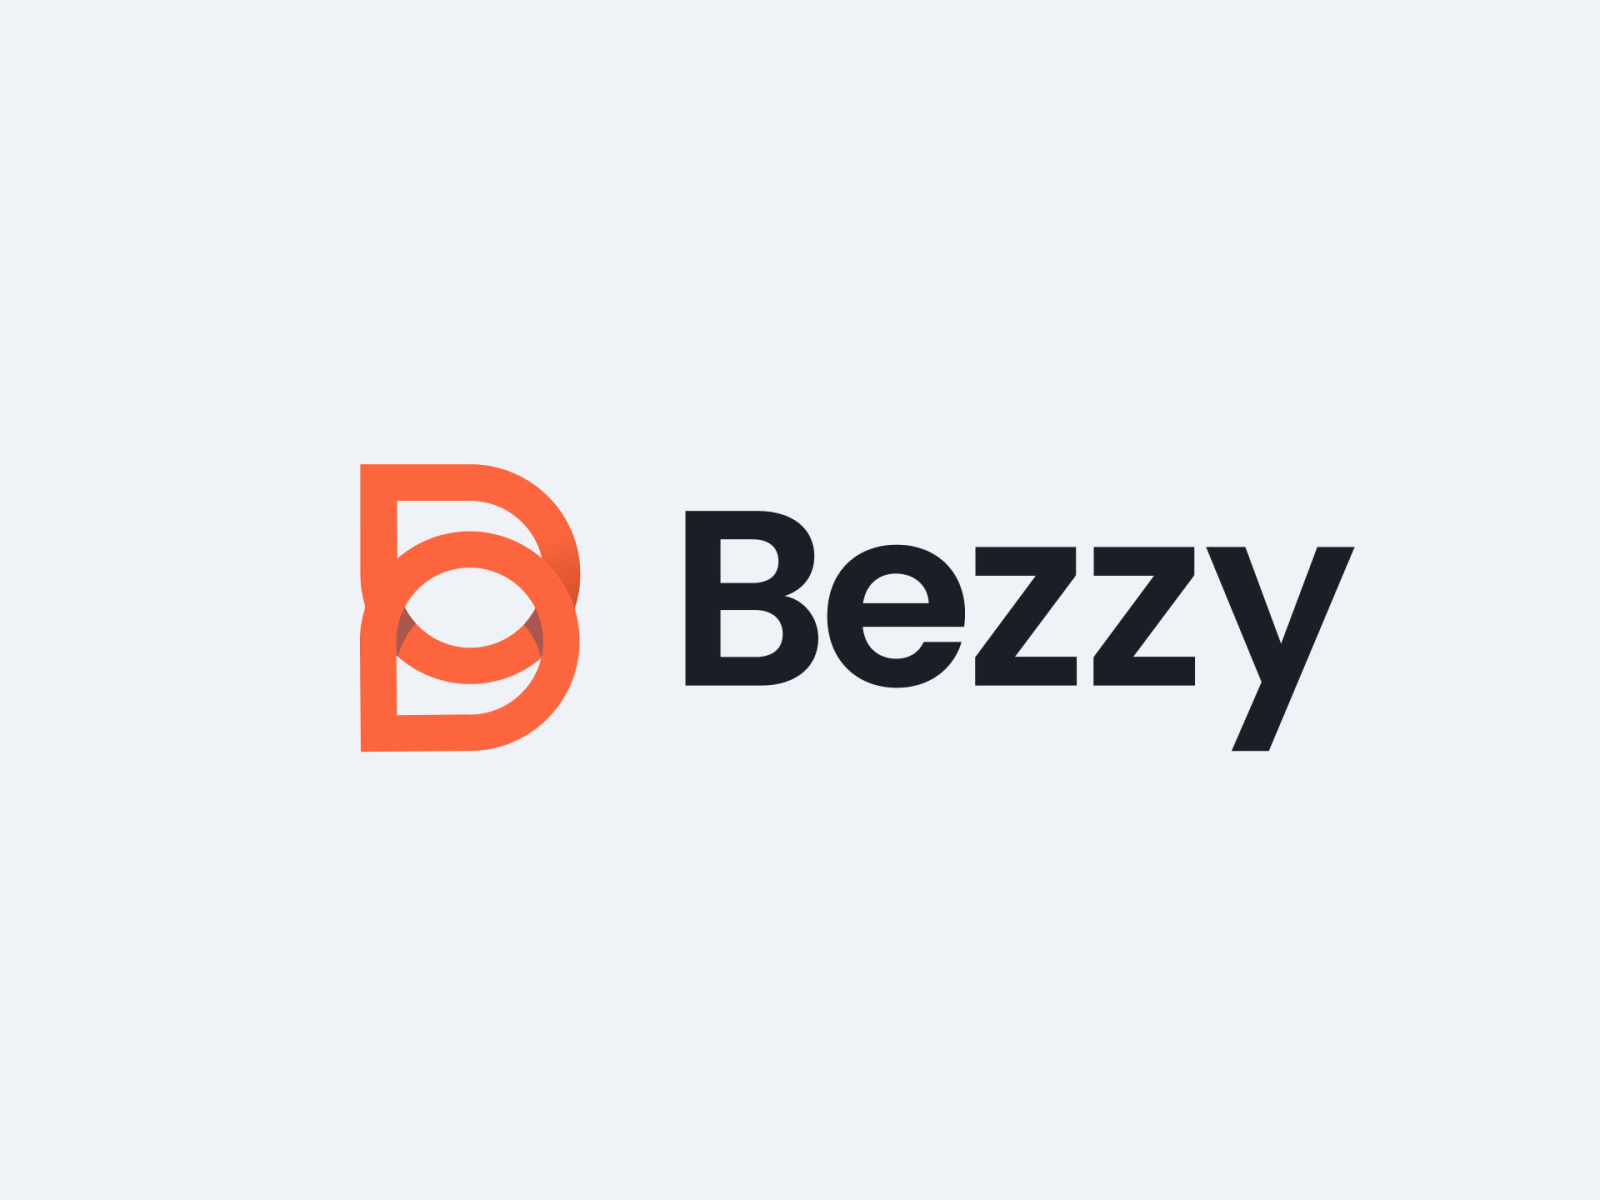 Bezzy App 2d an after effects animation animation 2d animation after effects animation design design logo logo animation logo animations motion graphics